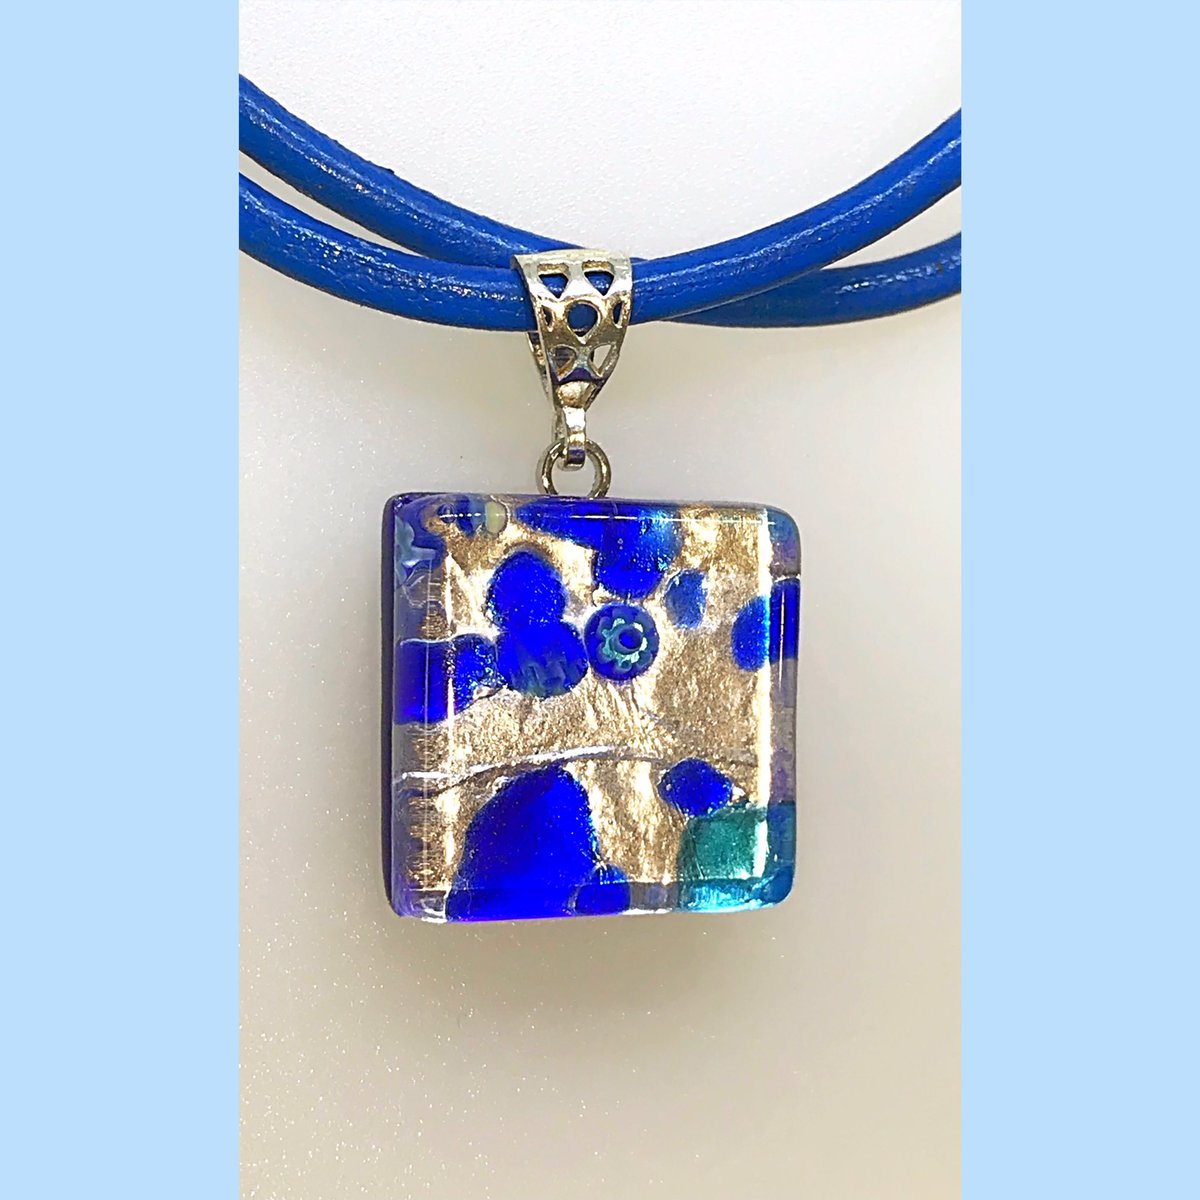 Murano Glass Pendant with Blue Leather Chain and Sterling Silver Findings.
marjancreations.com
#muranonecklace #bluenecklace #bluemuranopendant #marjancreations